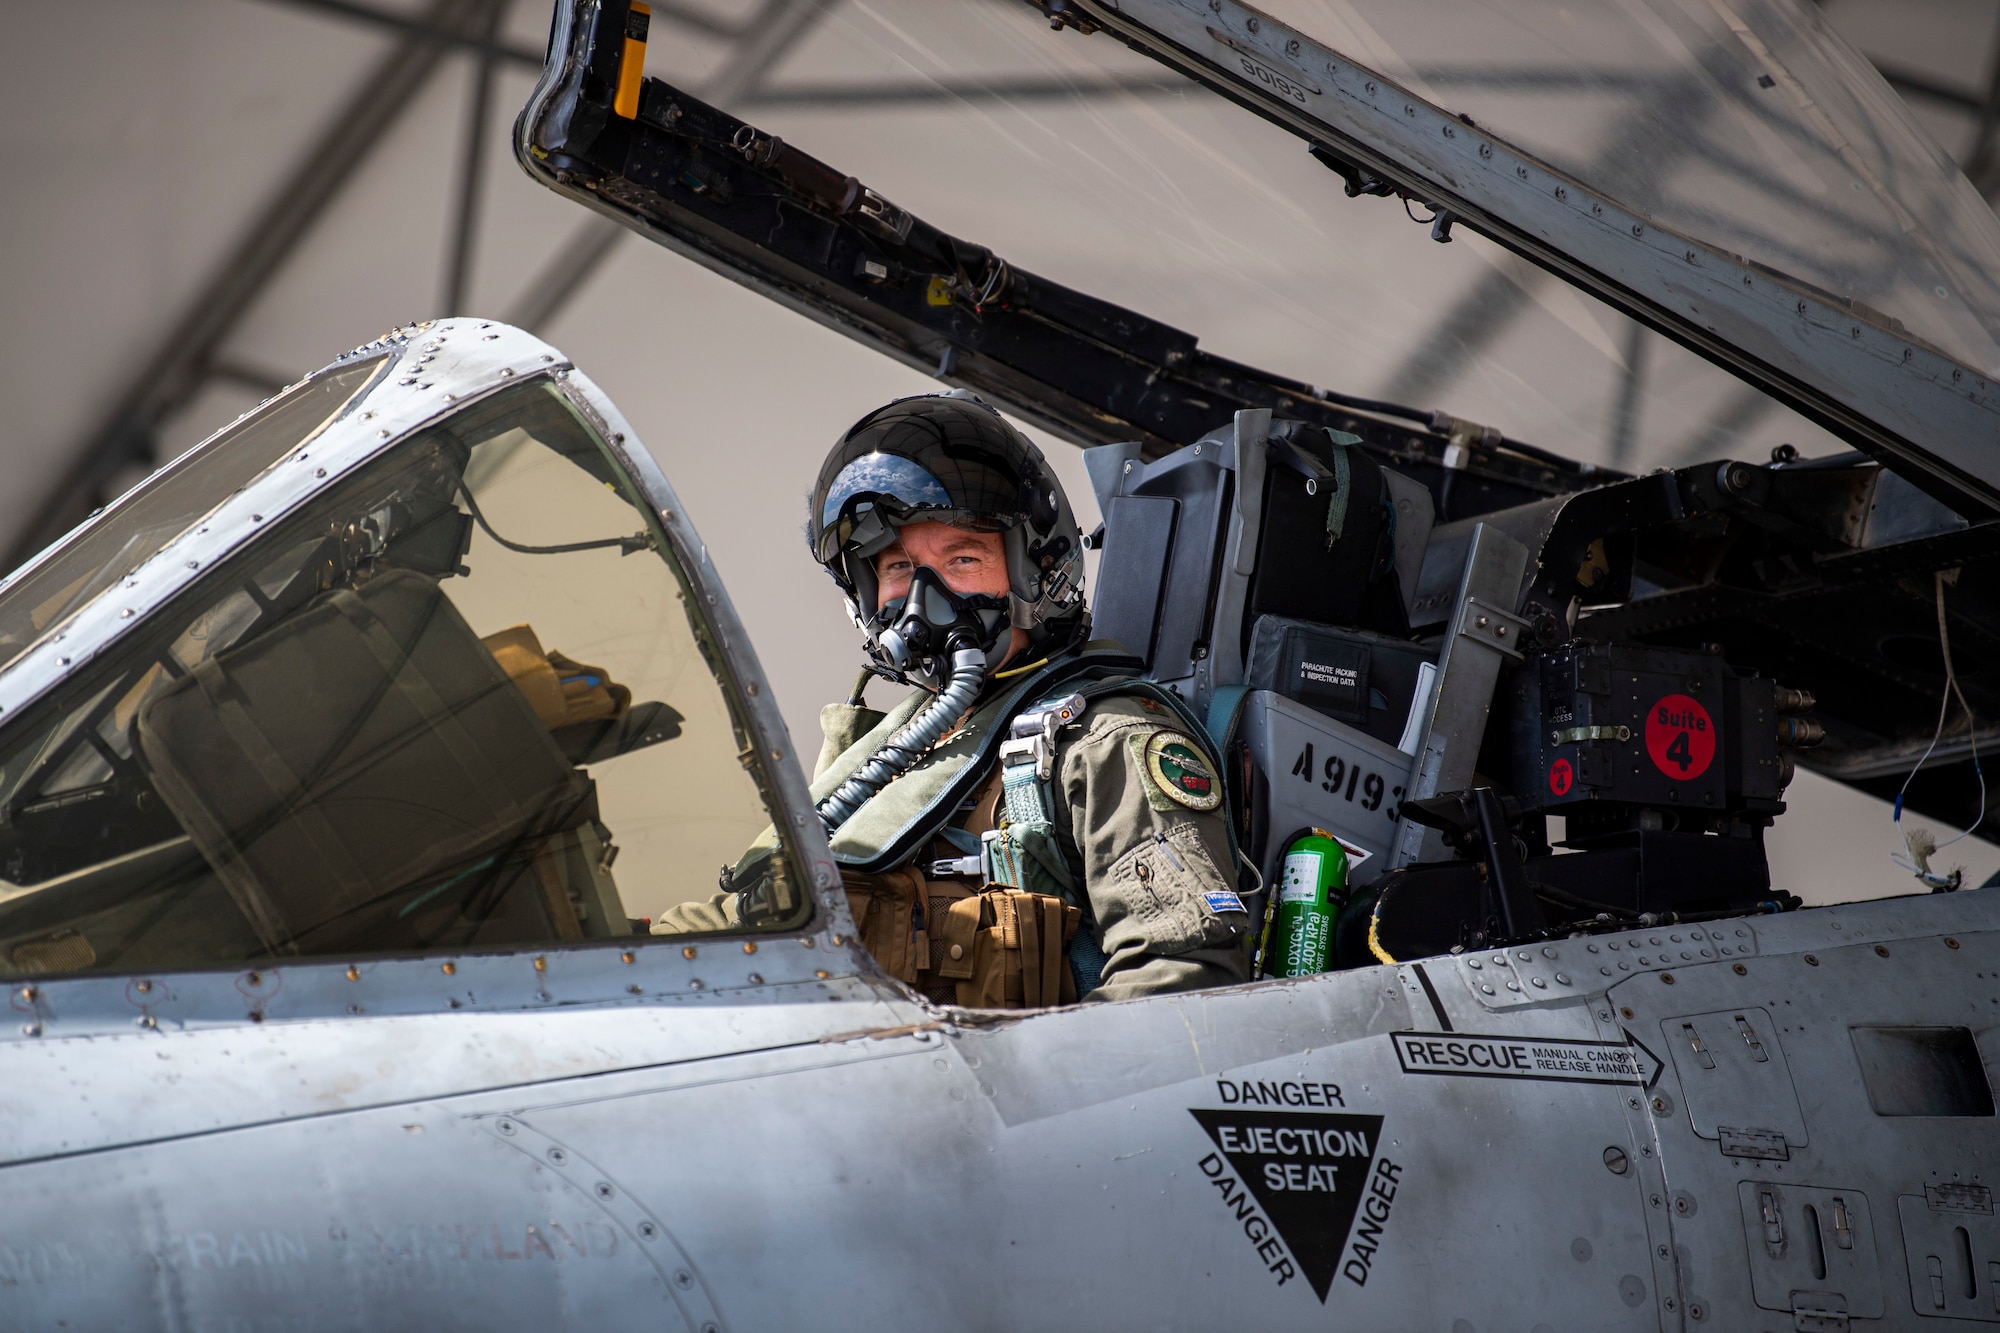 U.S. Air Force Maj. Tyler Ribar, 74th Fighter Squadron A-10C Thunderbolt II pilot, prepares for take-off during Exercise Ready Tiger 24-1 at Moody Air Force Base, Georgia, April 9, 2024. The 23rd Fighter Group directs the flying and maintenance operations for the U.S. Air Force’s largest A-10C fighter group, consisting of two combat-ready A-10C squadrons and an operations support squadron. The group ensures overall combat training and readiness for over 90 pilots and 180 support personnel.   During Ready Tiger 24-1, the 23rd Wing will be evaluated on the integration of Air Force Force Generation principles such as Agile Combat Employment, integrated combat turns, forward aerial refuelling points, multi-capable Airmen, and combat search and rescue capabilities. (U.S. Air Force photo by 2nd Lt. Benjamin Williams)